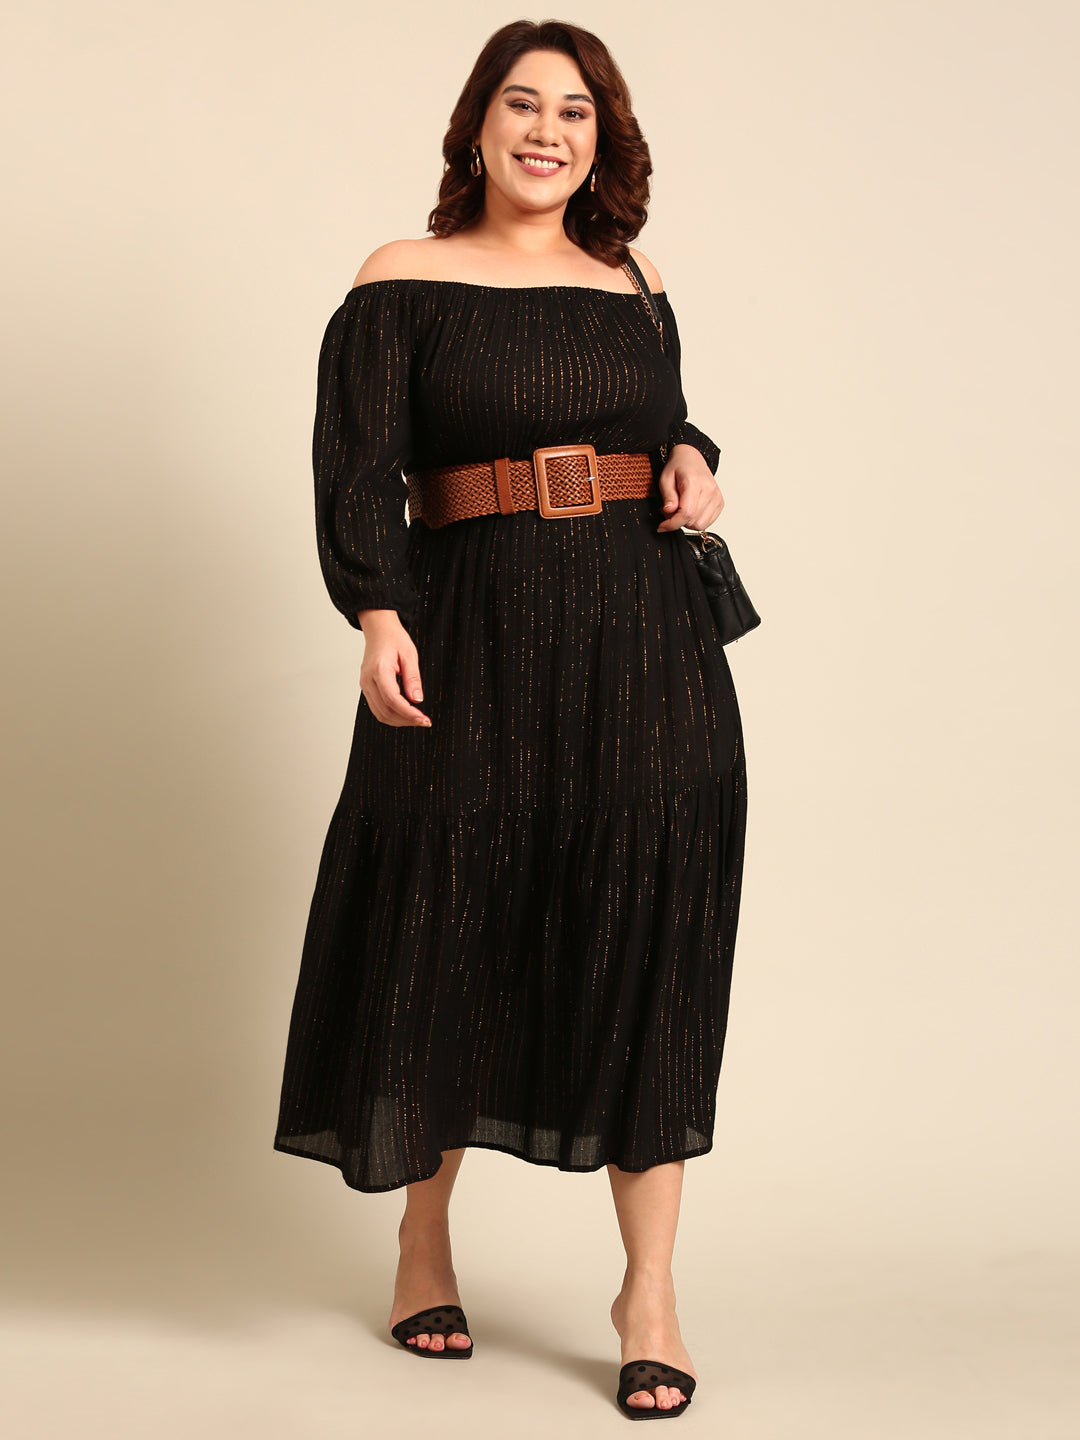 Trendy dresses for plus size women who love to stay in style